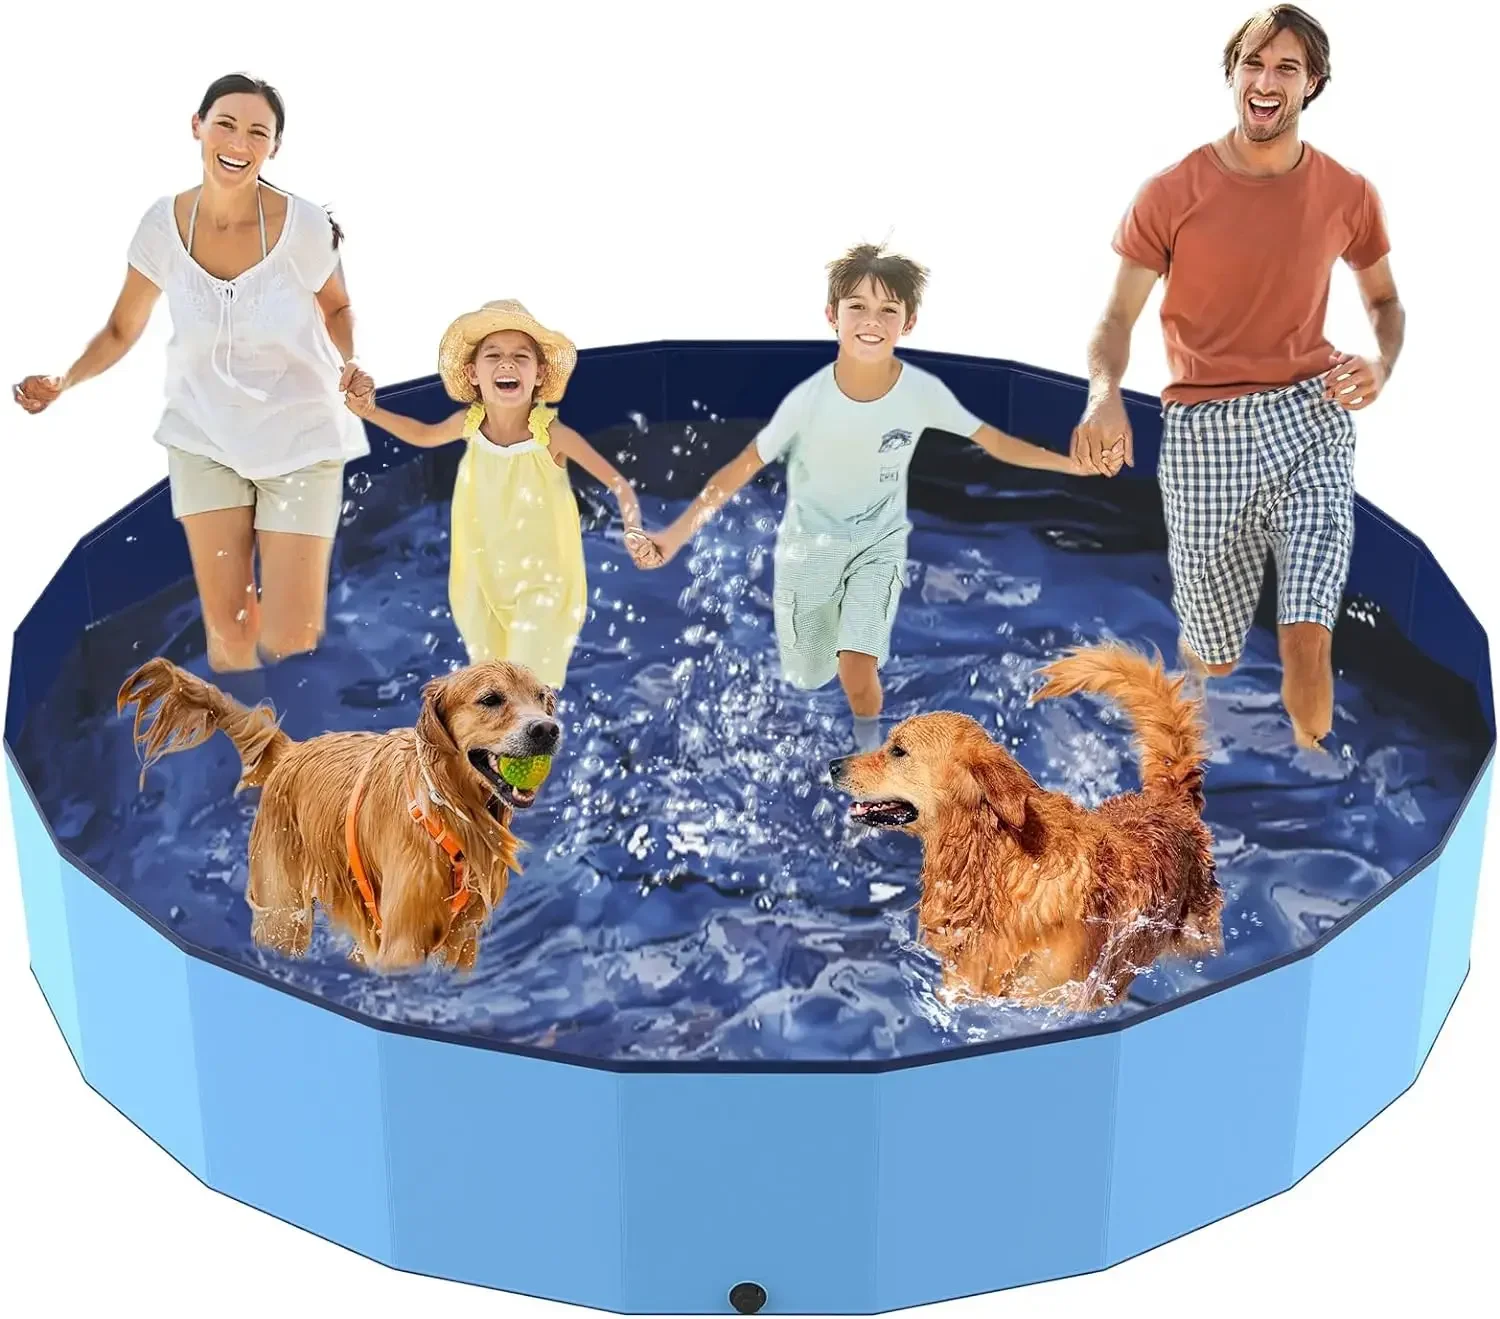 

97"Swimming Pools for Large Dogs Kids,Hard Plastic Shell Extra Water Play Pool,Non-Slip Portable Collapsible Outdoor Kiddie Pool